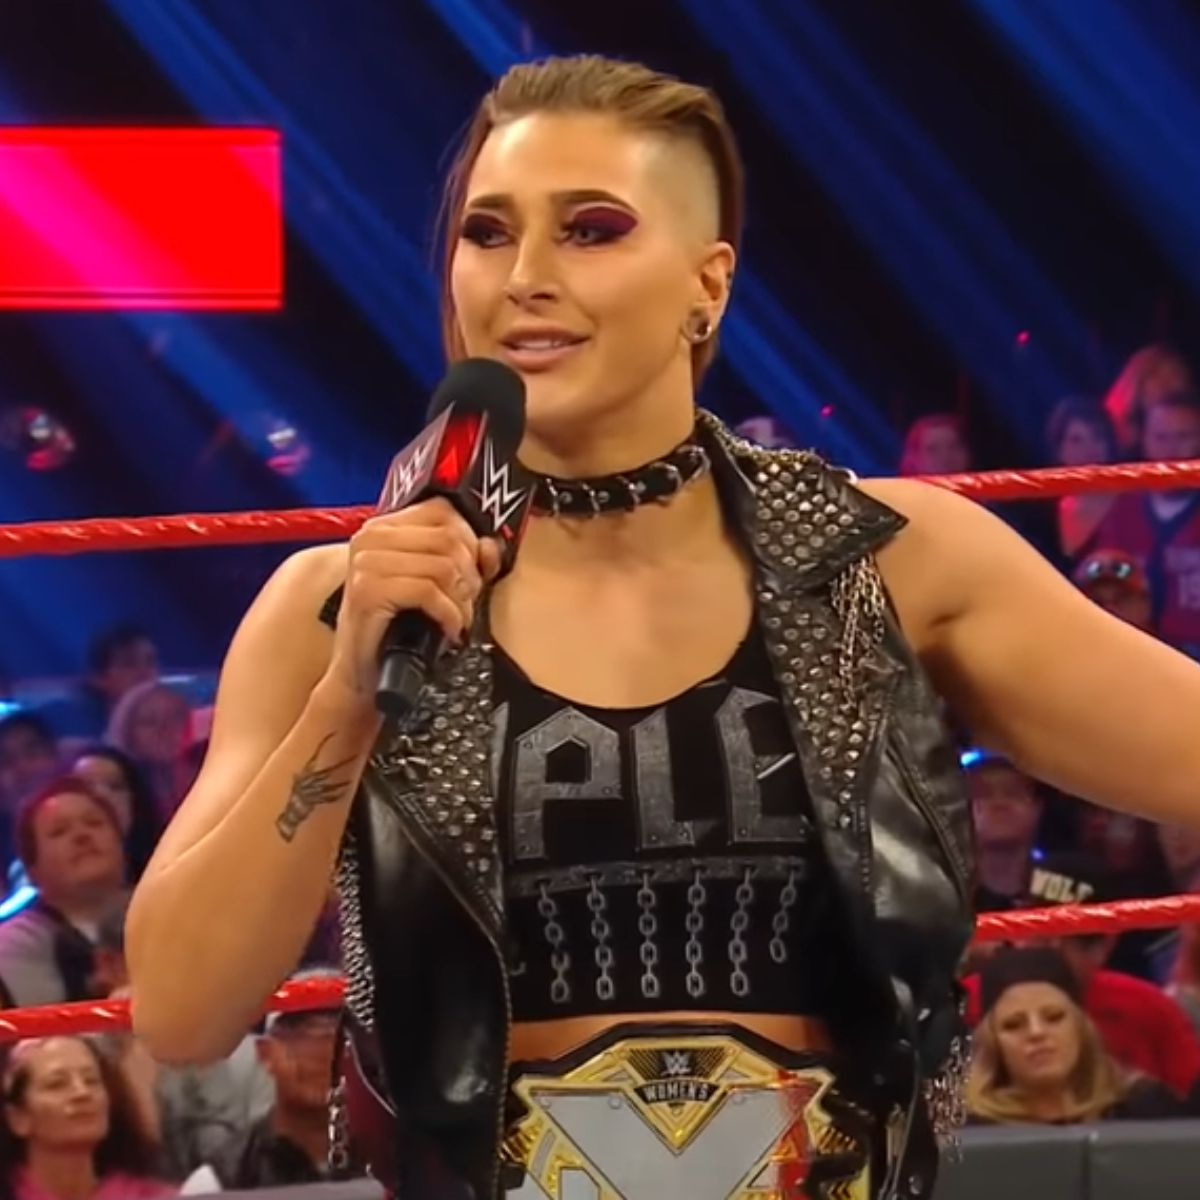 WWE News: Wrestler Rhea Ripley OPENS UP about dealing with mental